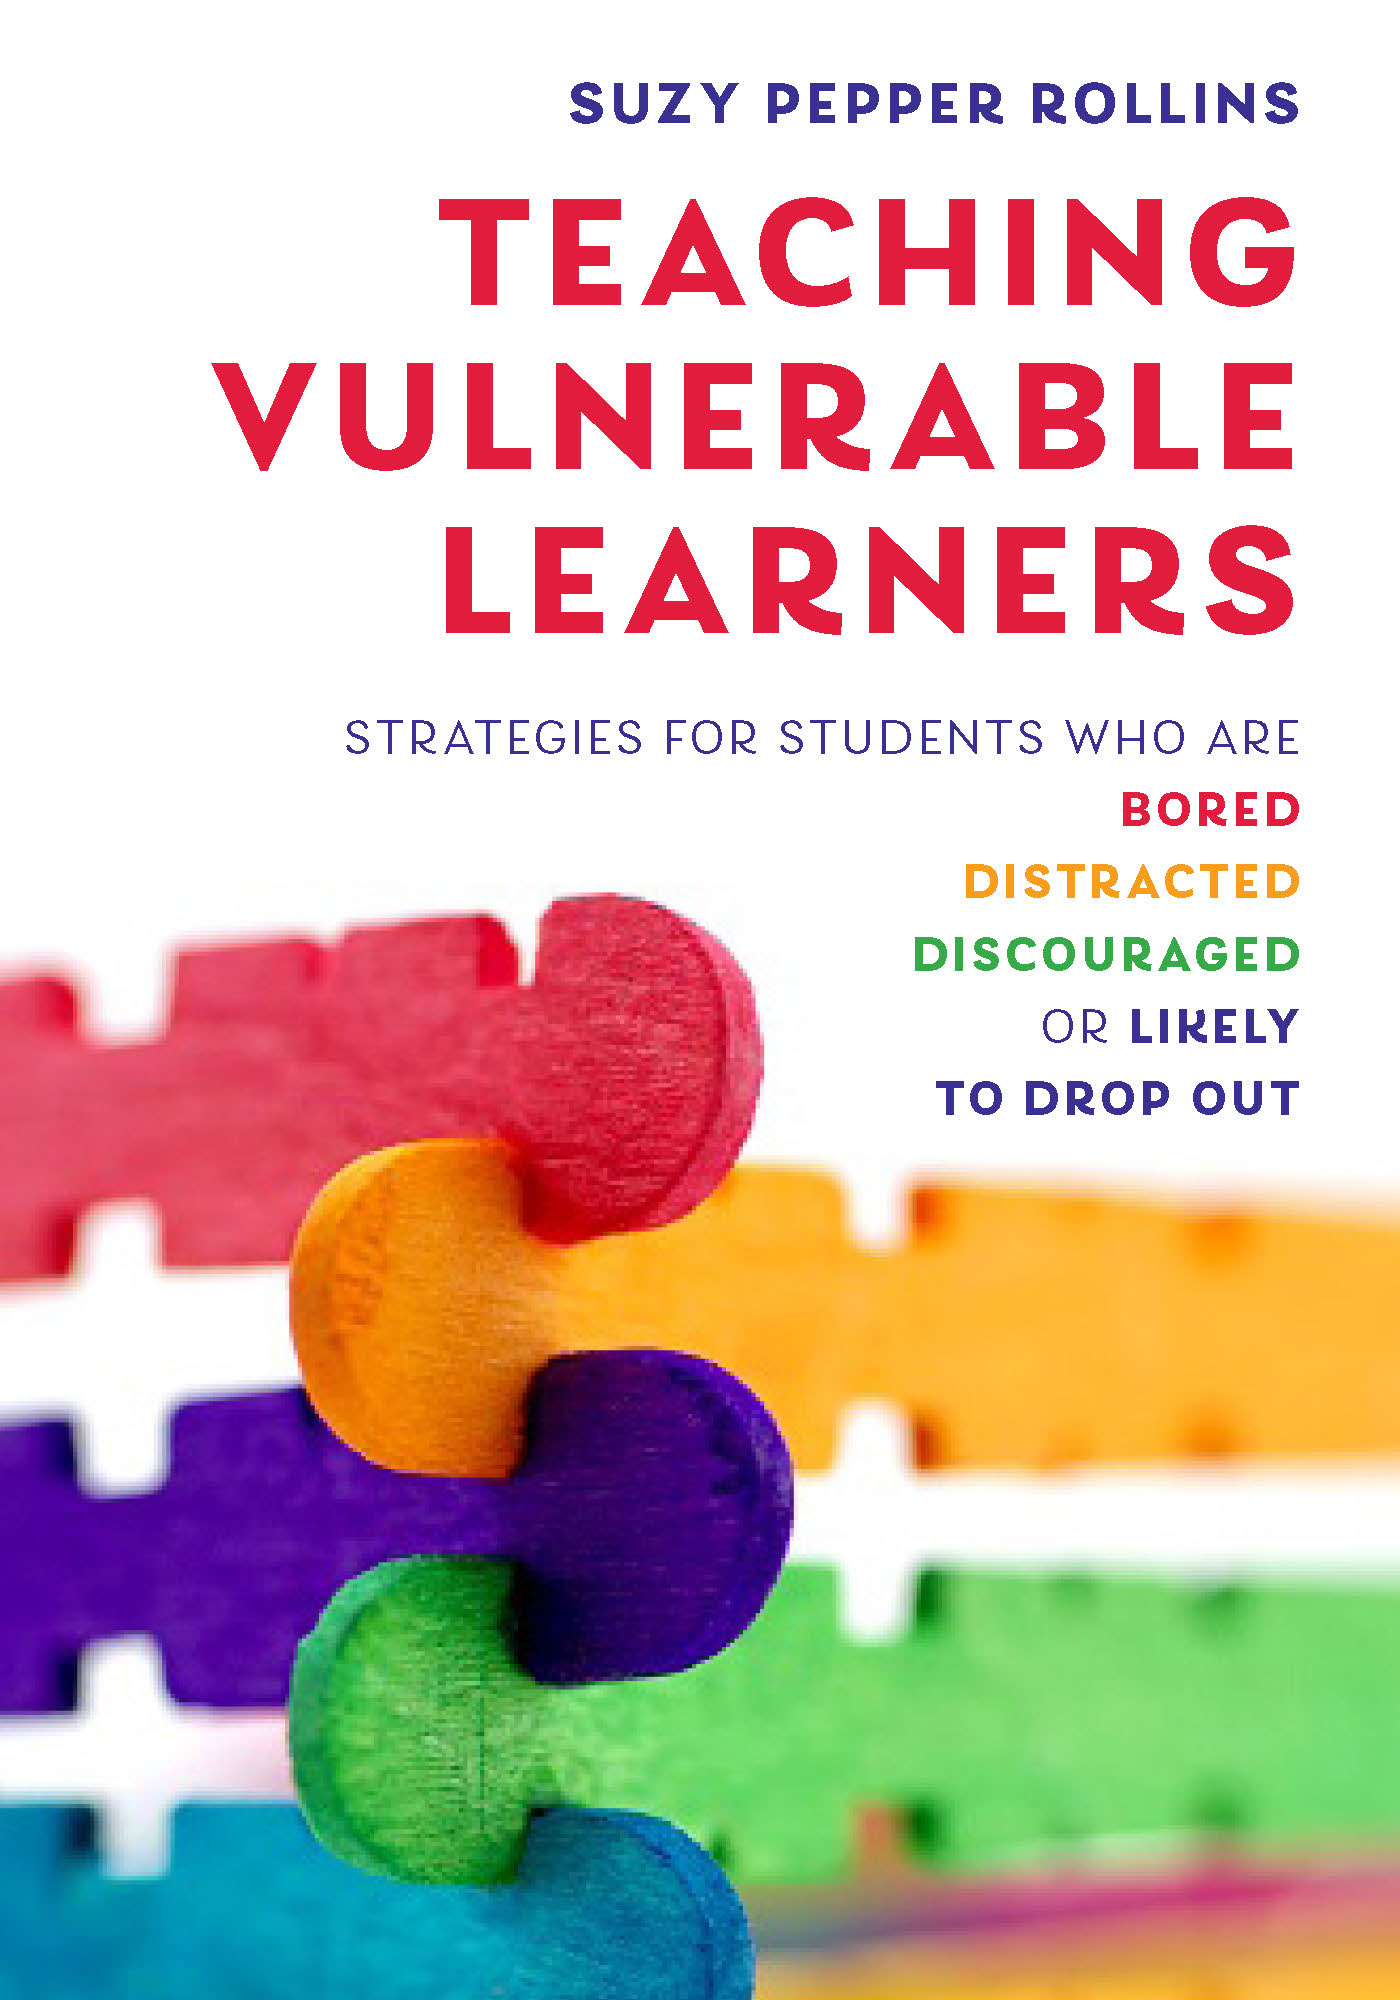 NORTON BOOKS IN EDUCATION TEACHING VULNERABLE LEARNERS Strategies for Students - photo 1